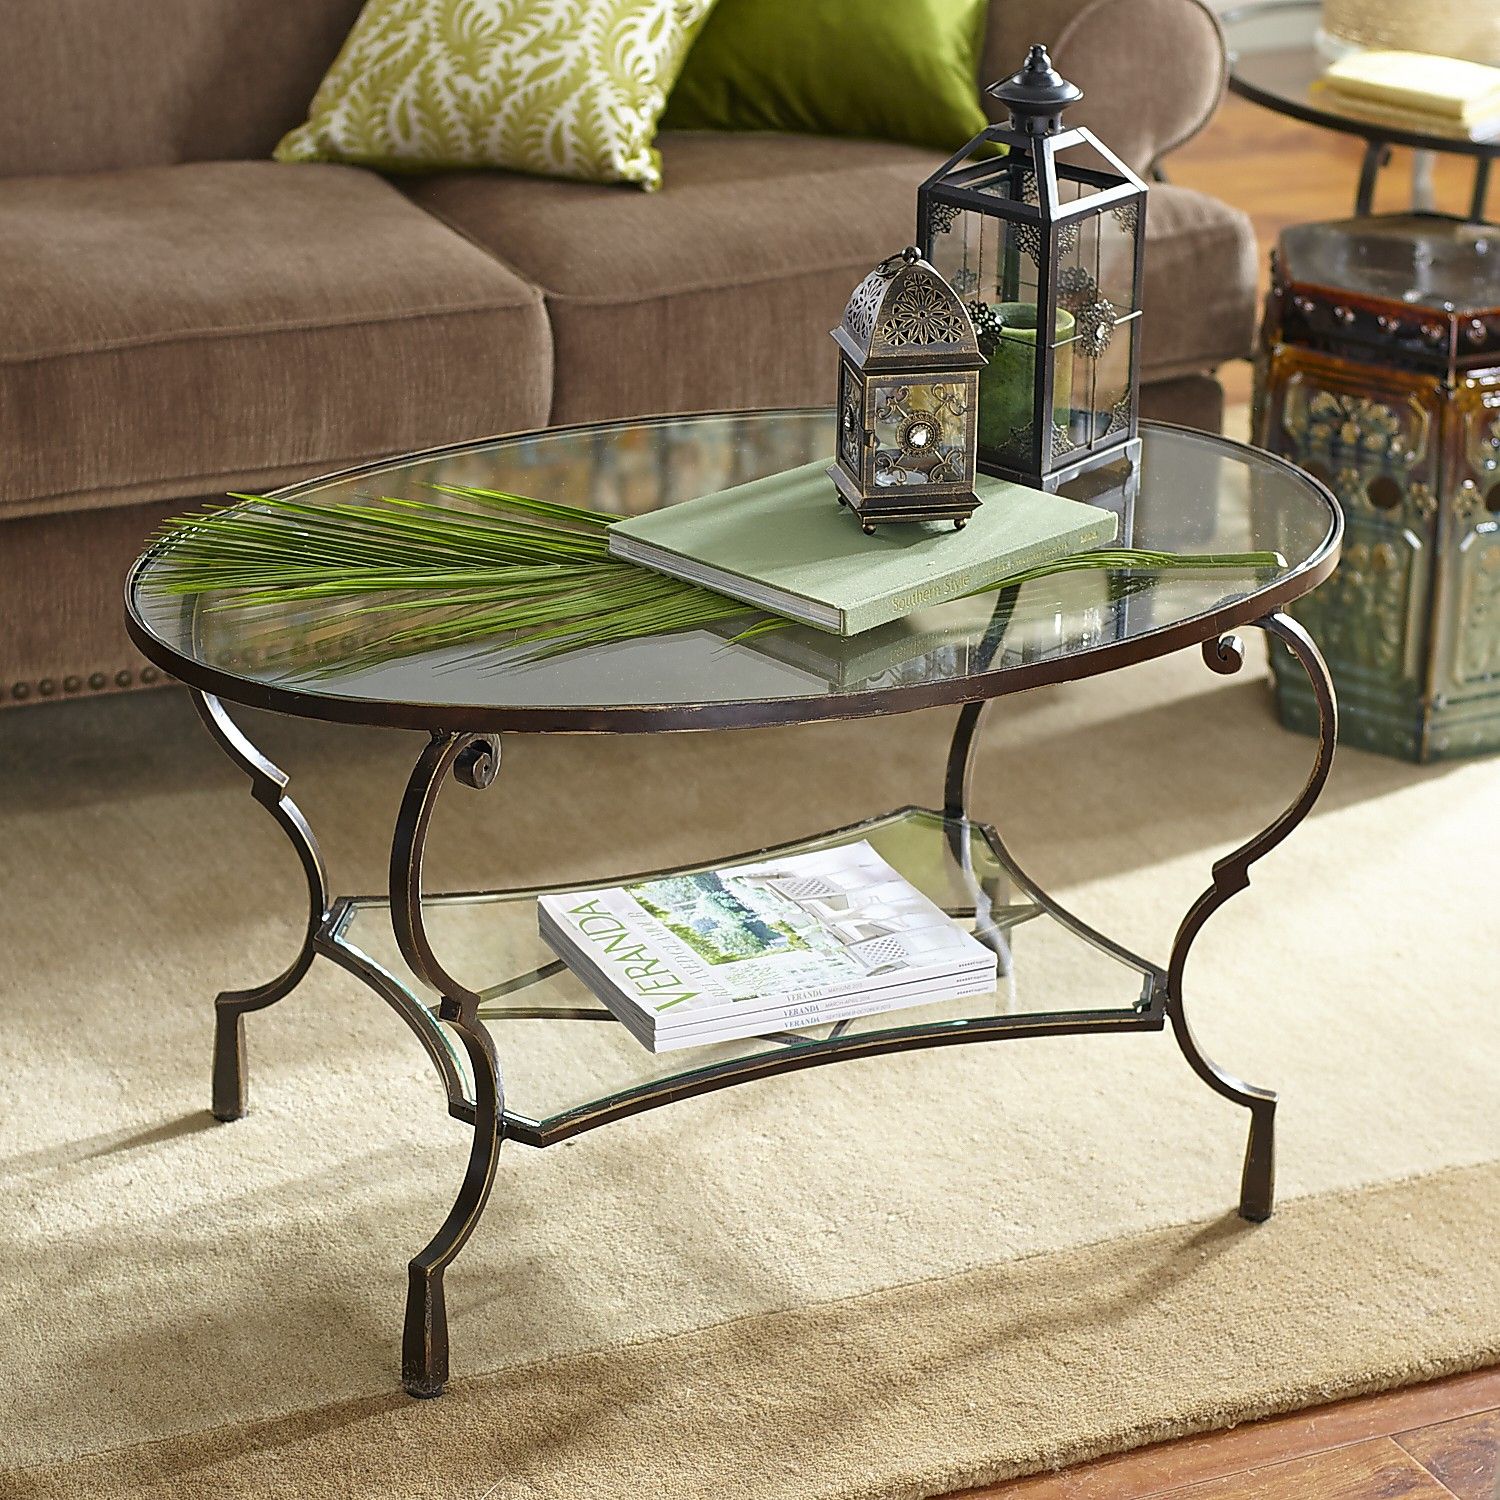 Chasca Glass Top Oval Coffee Table – Pier1 For Oval Glass Coffee Tables (Gallery 2 of 20)